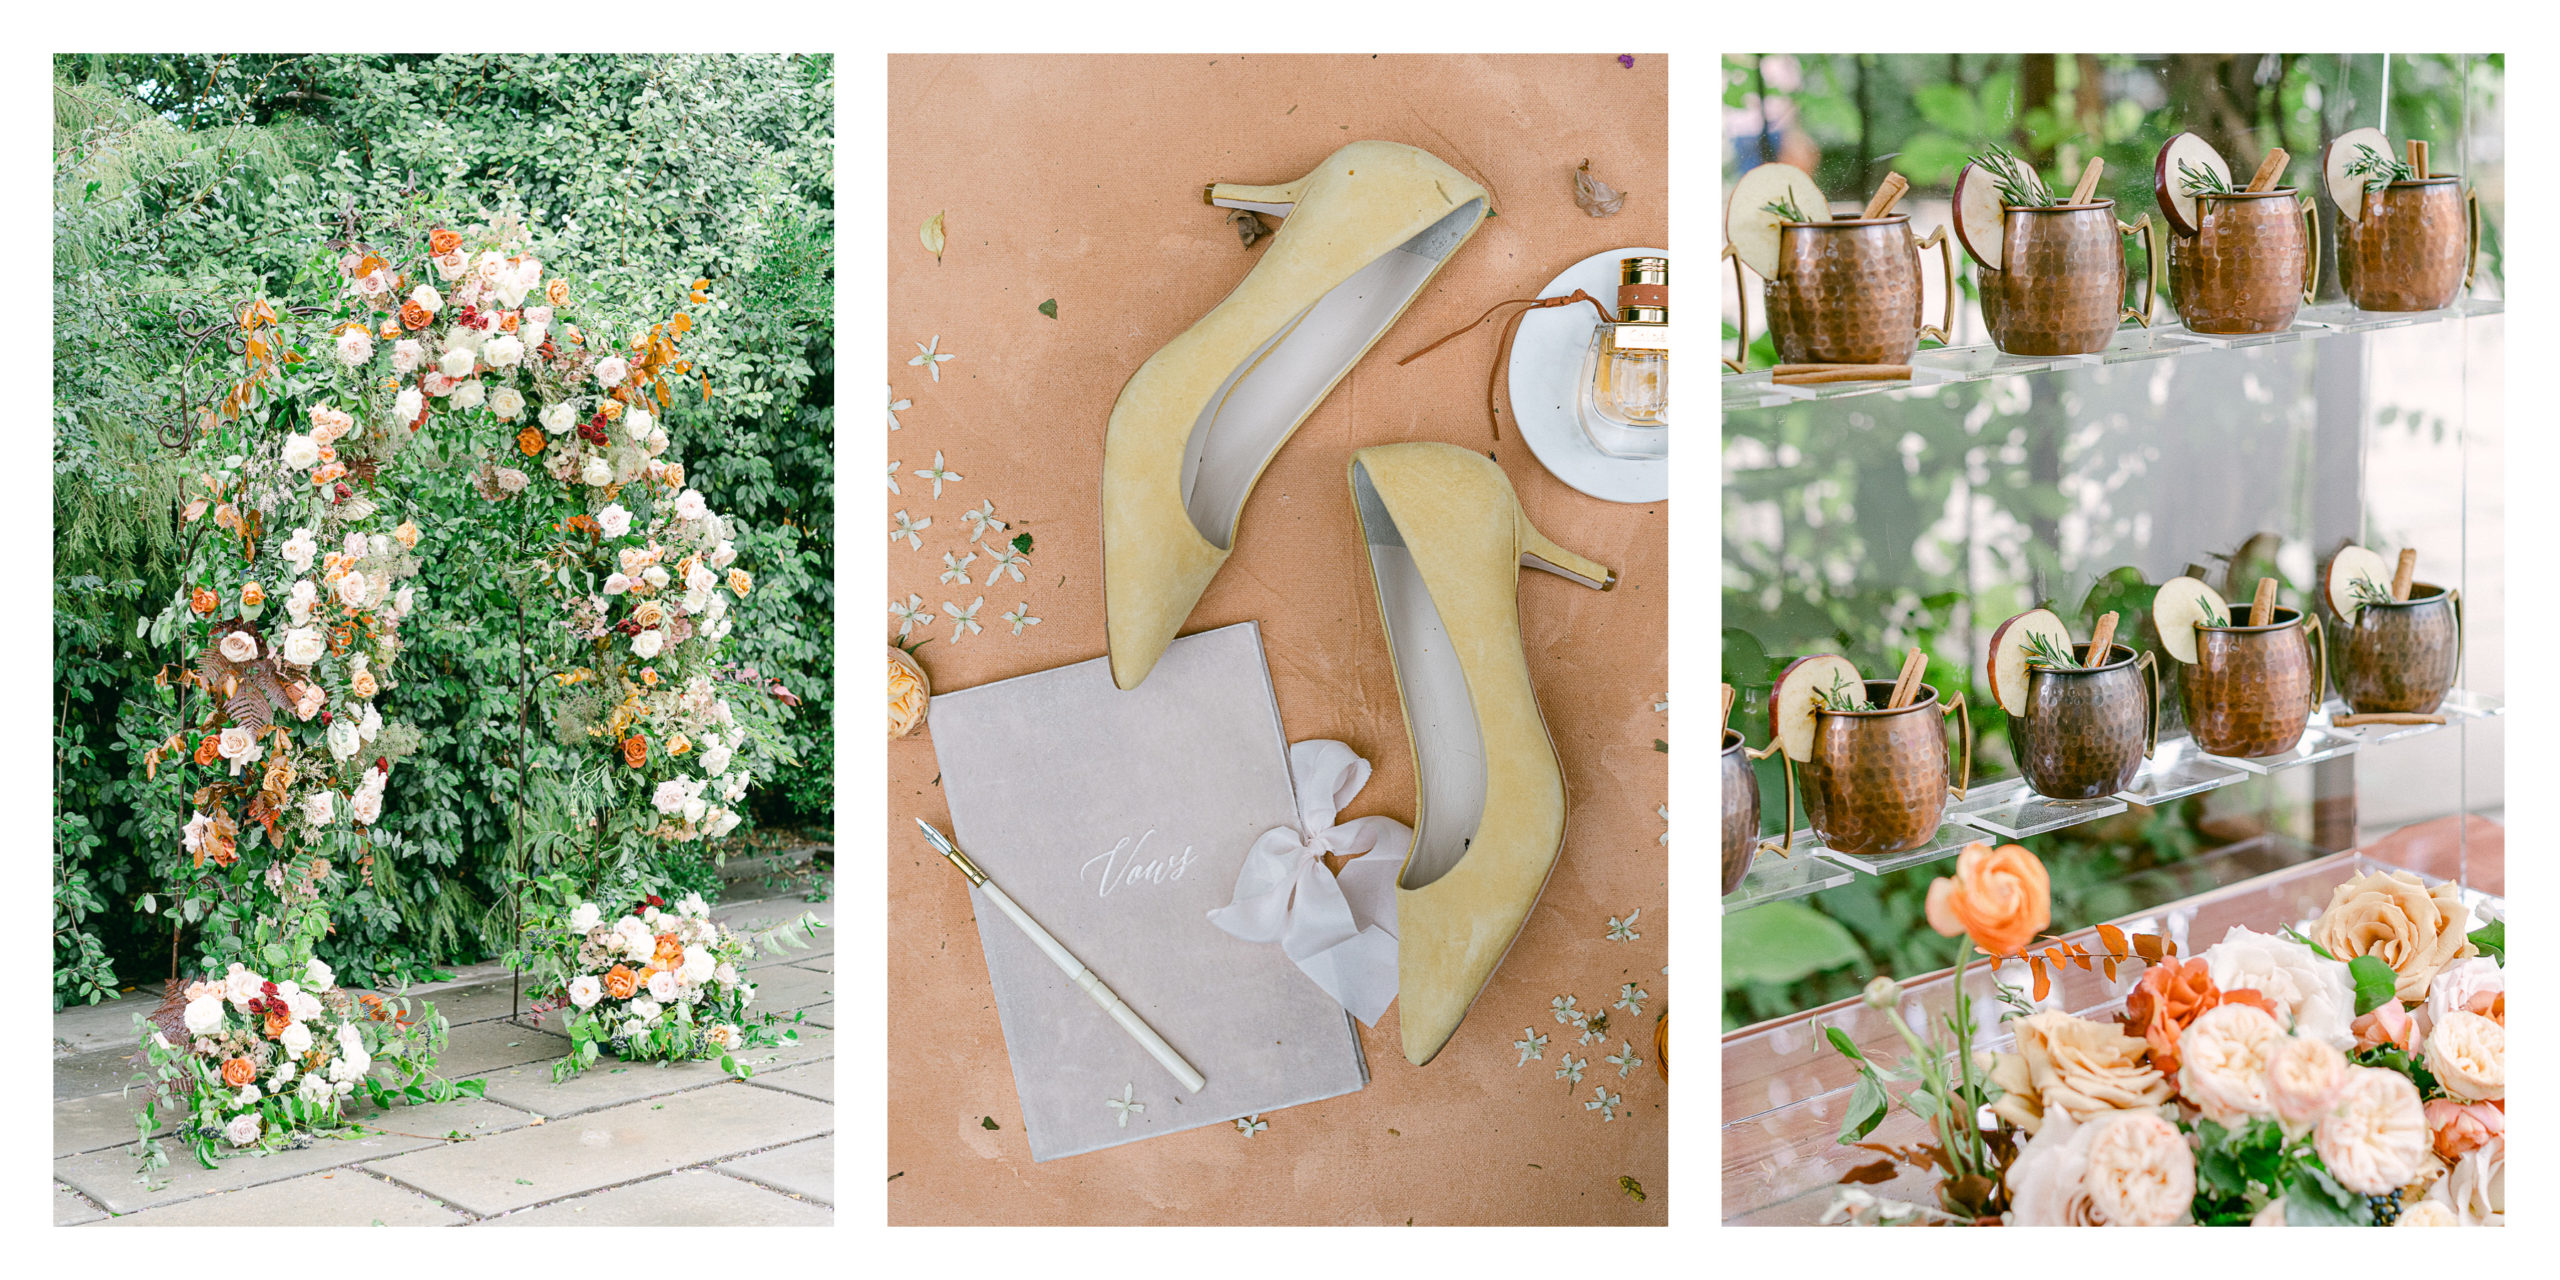 Fall Wedding Color Inspiration at Daffodil Hill